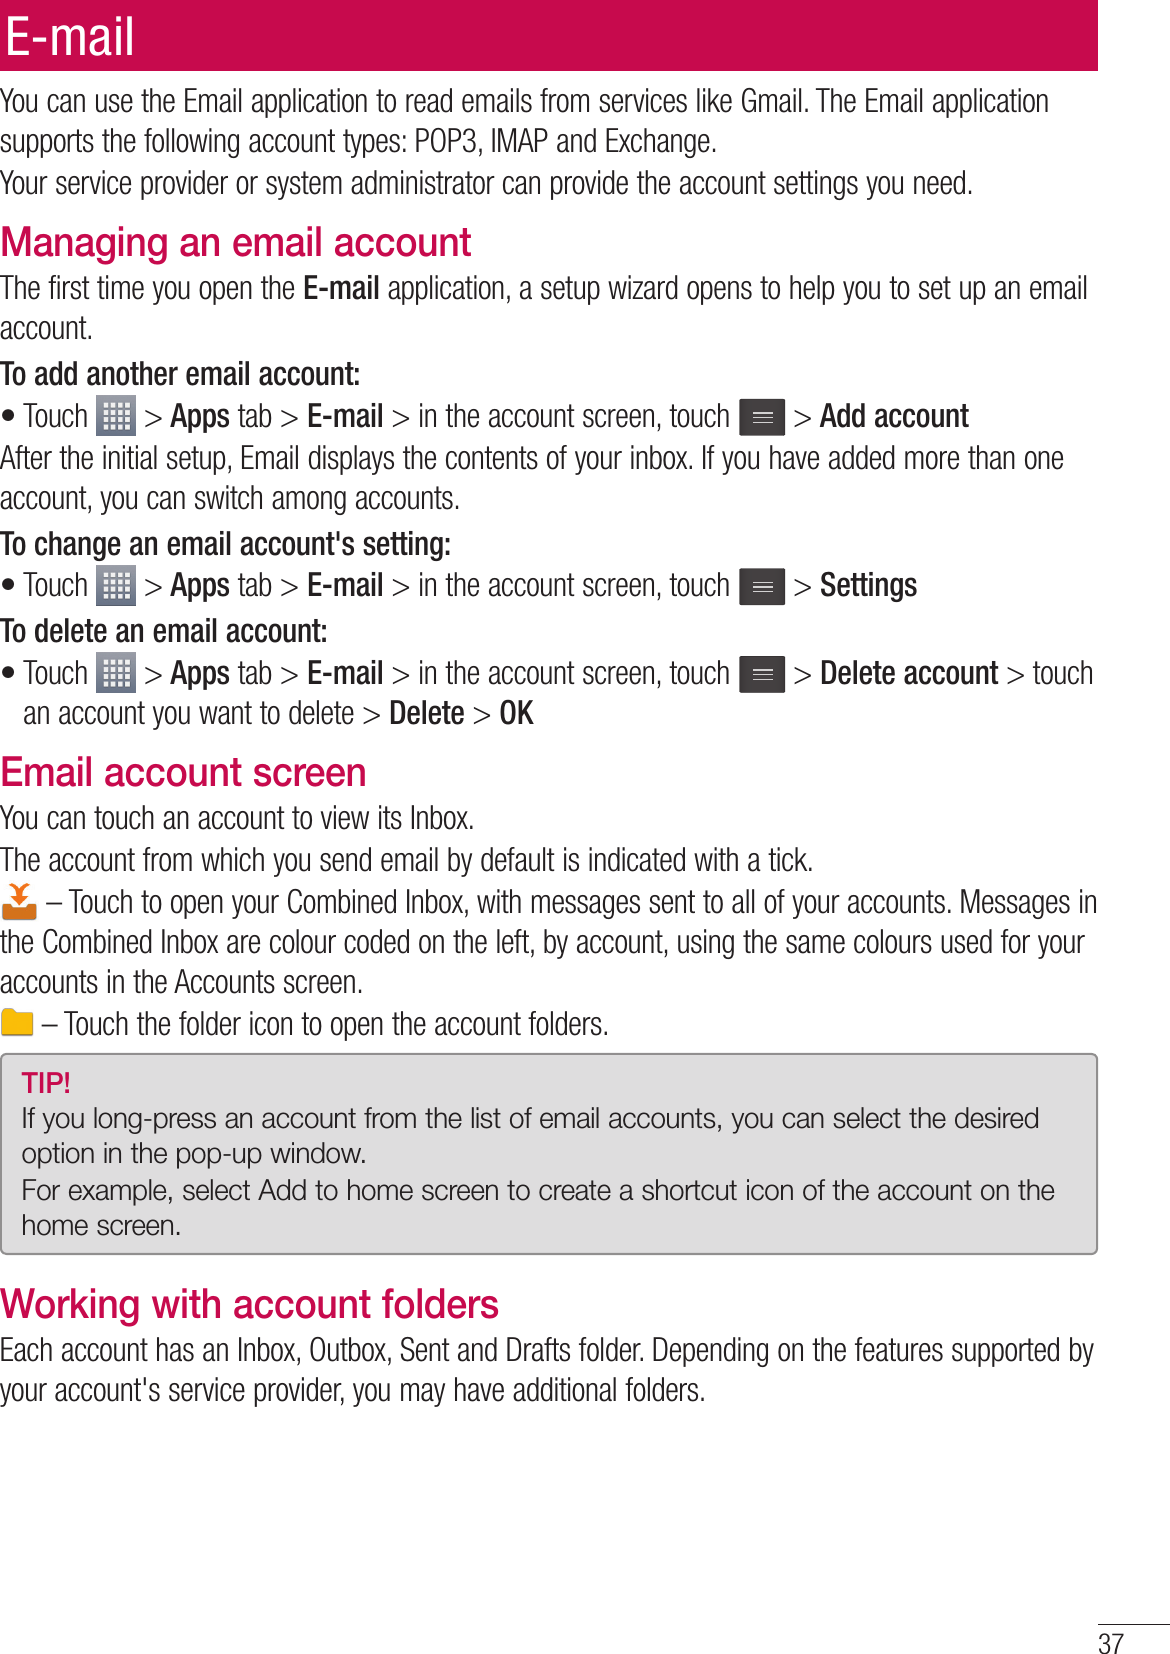 37You can use the Email application to read emails from services like Gmail. The Email application supports the following account types: POP3, IMAP and Exchange.Your service provider or system administrator can provide the account settings you need.Managing an email accountThe first time you open the E-mail application, a setup wizard opens to help you to set up an email account.To add another email account:Touch   &gt; Apps tab &gt; E-mail &gt; in the account screen, touch   &gt; Add accountAfter the initial setup, Email displays the contents of your inbox. If you have added more than one account, you can switch among accounts. To change an email account&apos;s setting:Touch   &gt; Apps tab &gt; E-mail &gt; in the account screen, touch   &gt; SettingsTo delete an email account:Touch   &gt; Apps tab &gt; E-mail &gt; in the account screen, touch   &gt; Delete account &gt; touch an account you want to delete &gt; Delete &gt; OKEmail account screenYou can touch an account to view its Inbox.The account from which you send email by default is indicated with a tick. – Touch to open your Combined Inbox, with messages sent to all of your accounts. Messages in the Combined Inbox are colour coded on the left, by account, using the same colours used for your accounts in the Accounts screen. – Touch the folder icon to open the account folders.TIP! If you long-press an account from the list of email accounts, you can select the desired option in the pop-up window.For example, select Add to home screen to create a shortcut icon of the account on the home screen.Working with account foldersEach account has an Inbox, Outbox, Sent and Drafts folder. Depending on the features supported by your account&apos;s service provider, you may have additional folders.•••E-mail